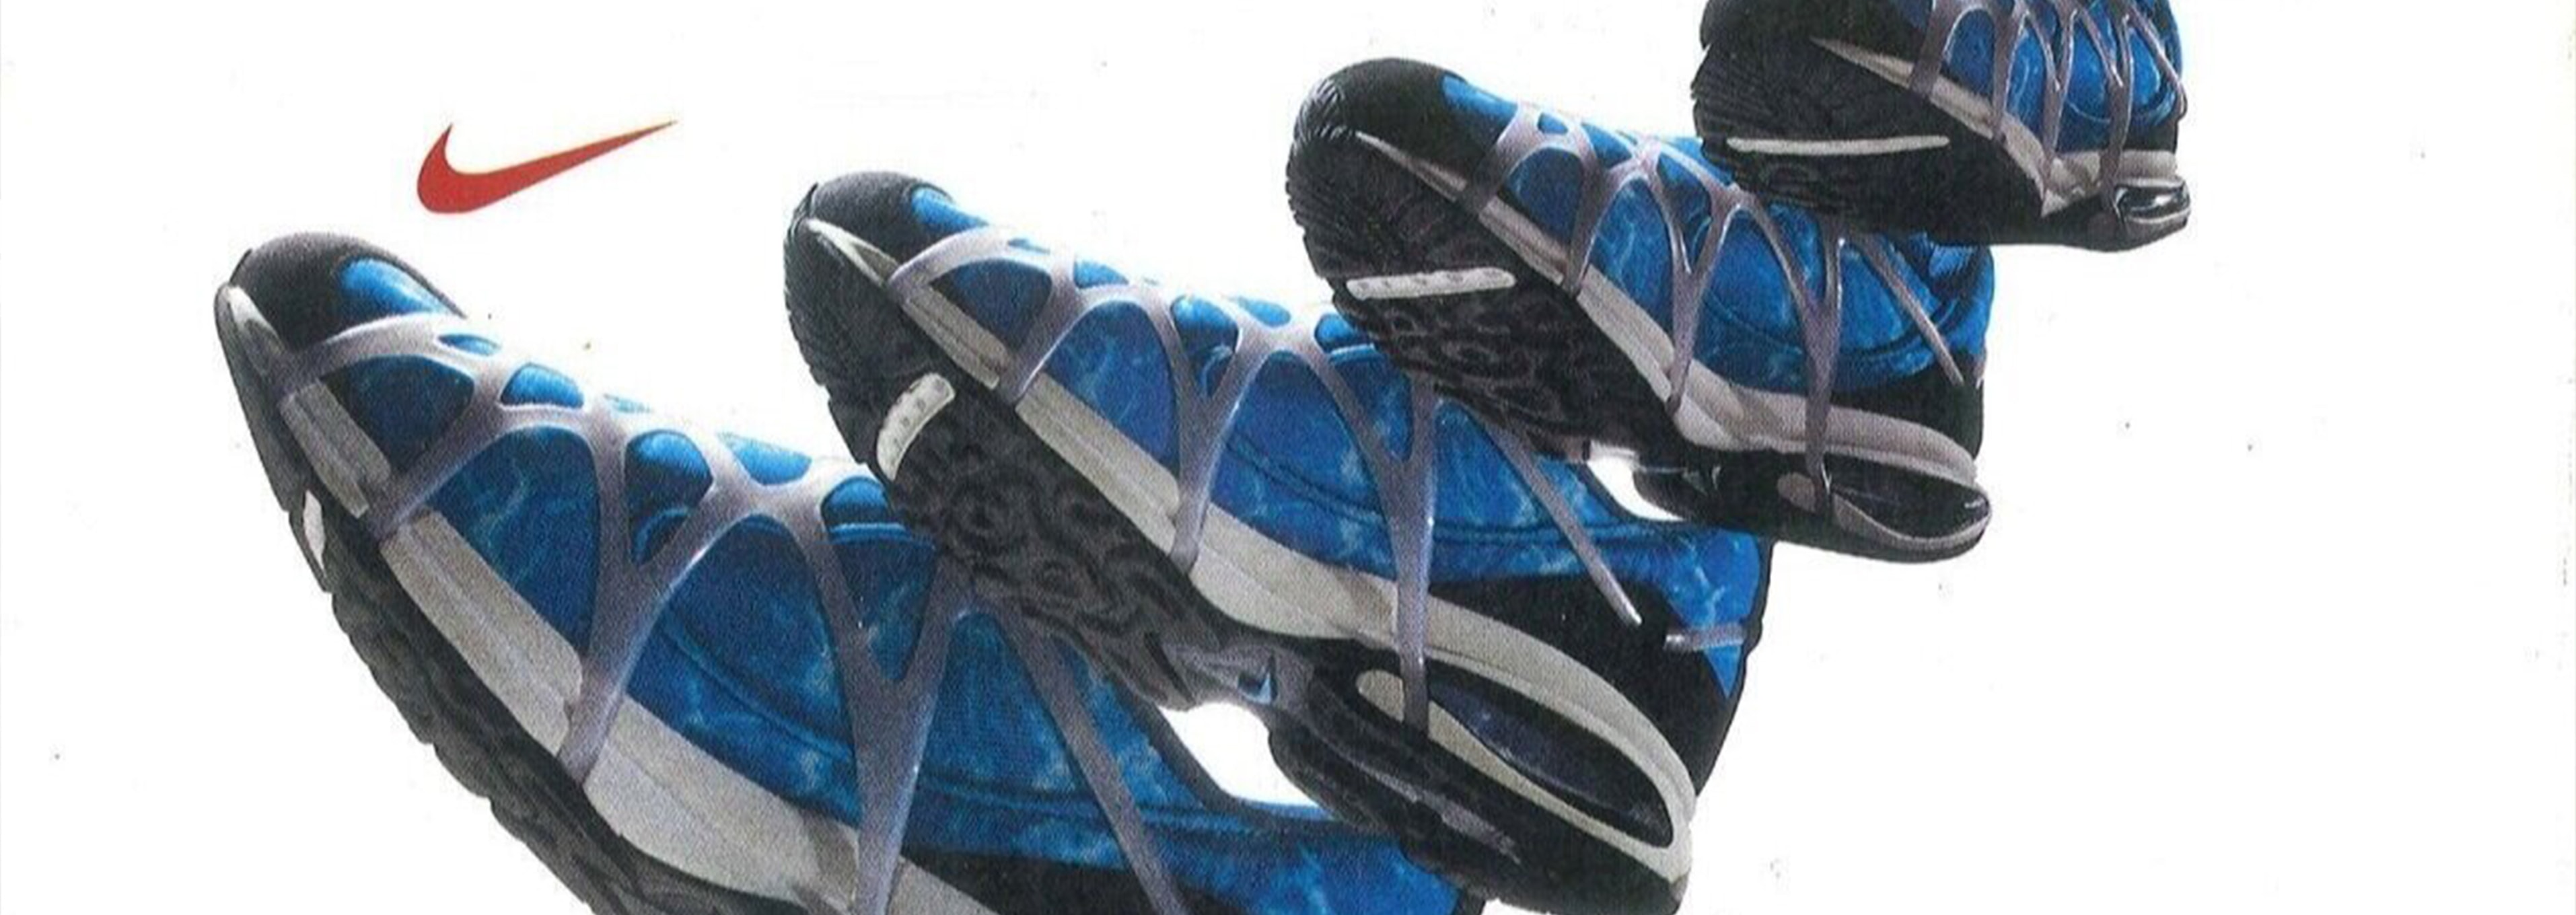 The History of the Nike Air Kukini